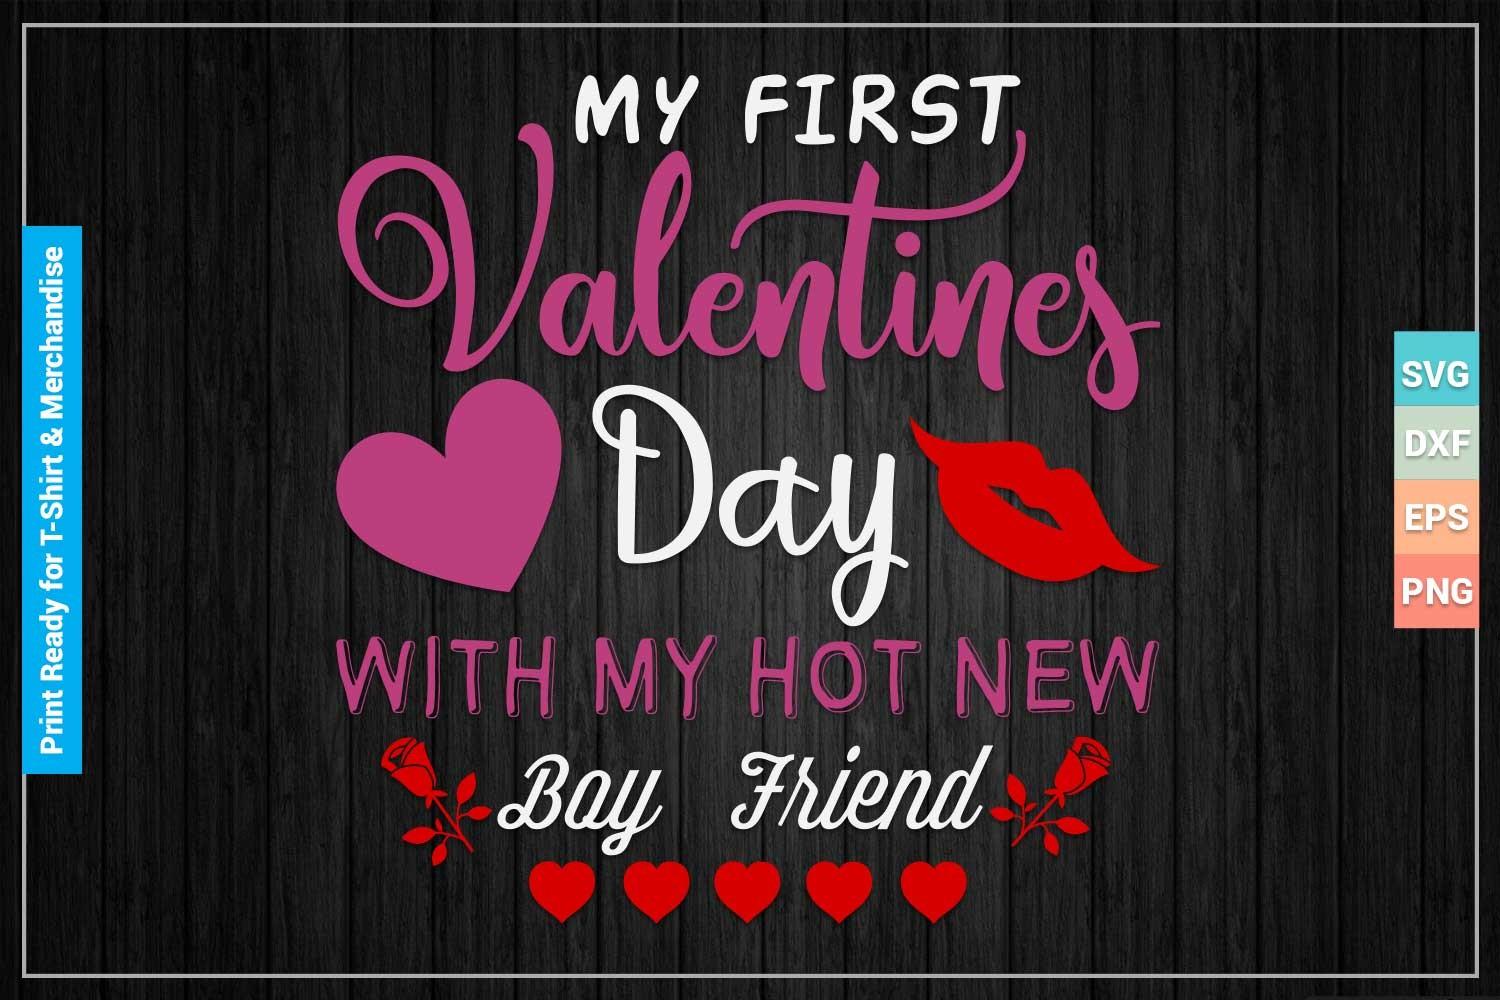 MY FIRST VALENTINES DAY SVG Cricut Files